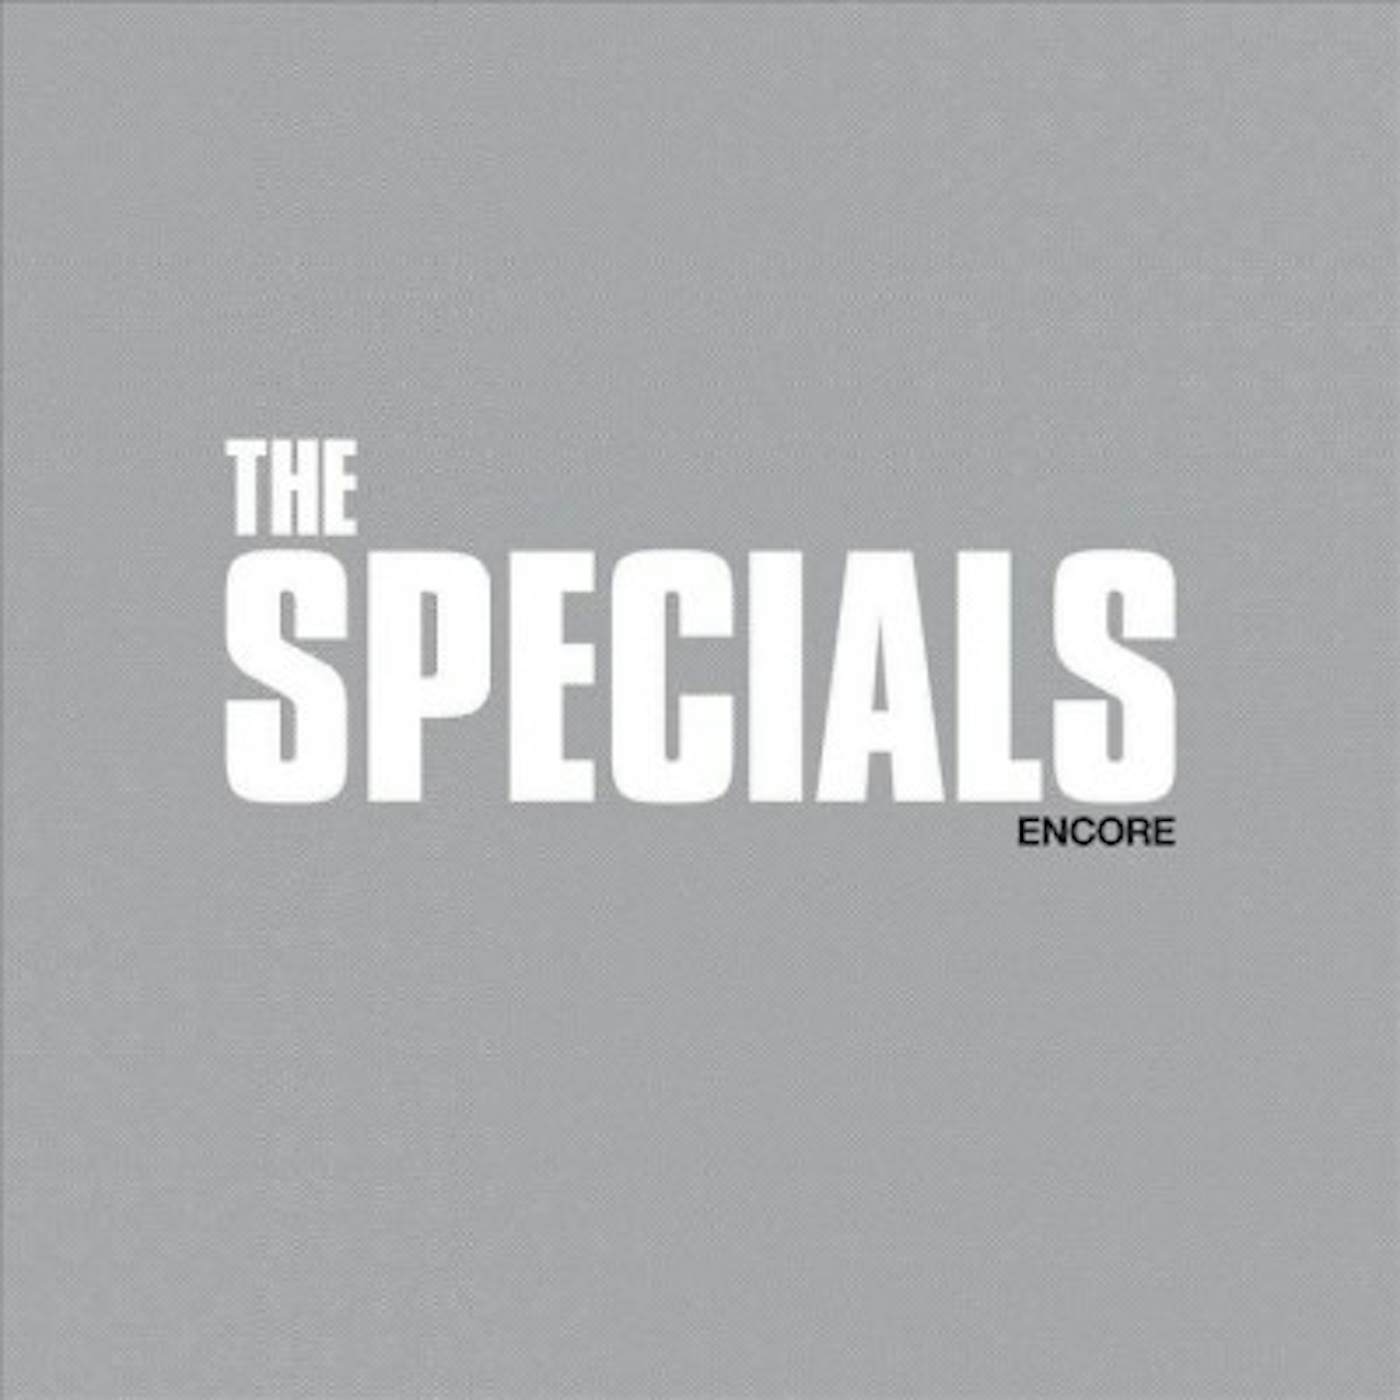 The Specials ENCORE (2 CD/DELUXE EDITION) CD